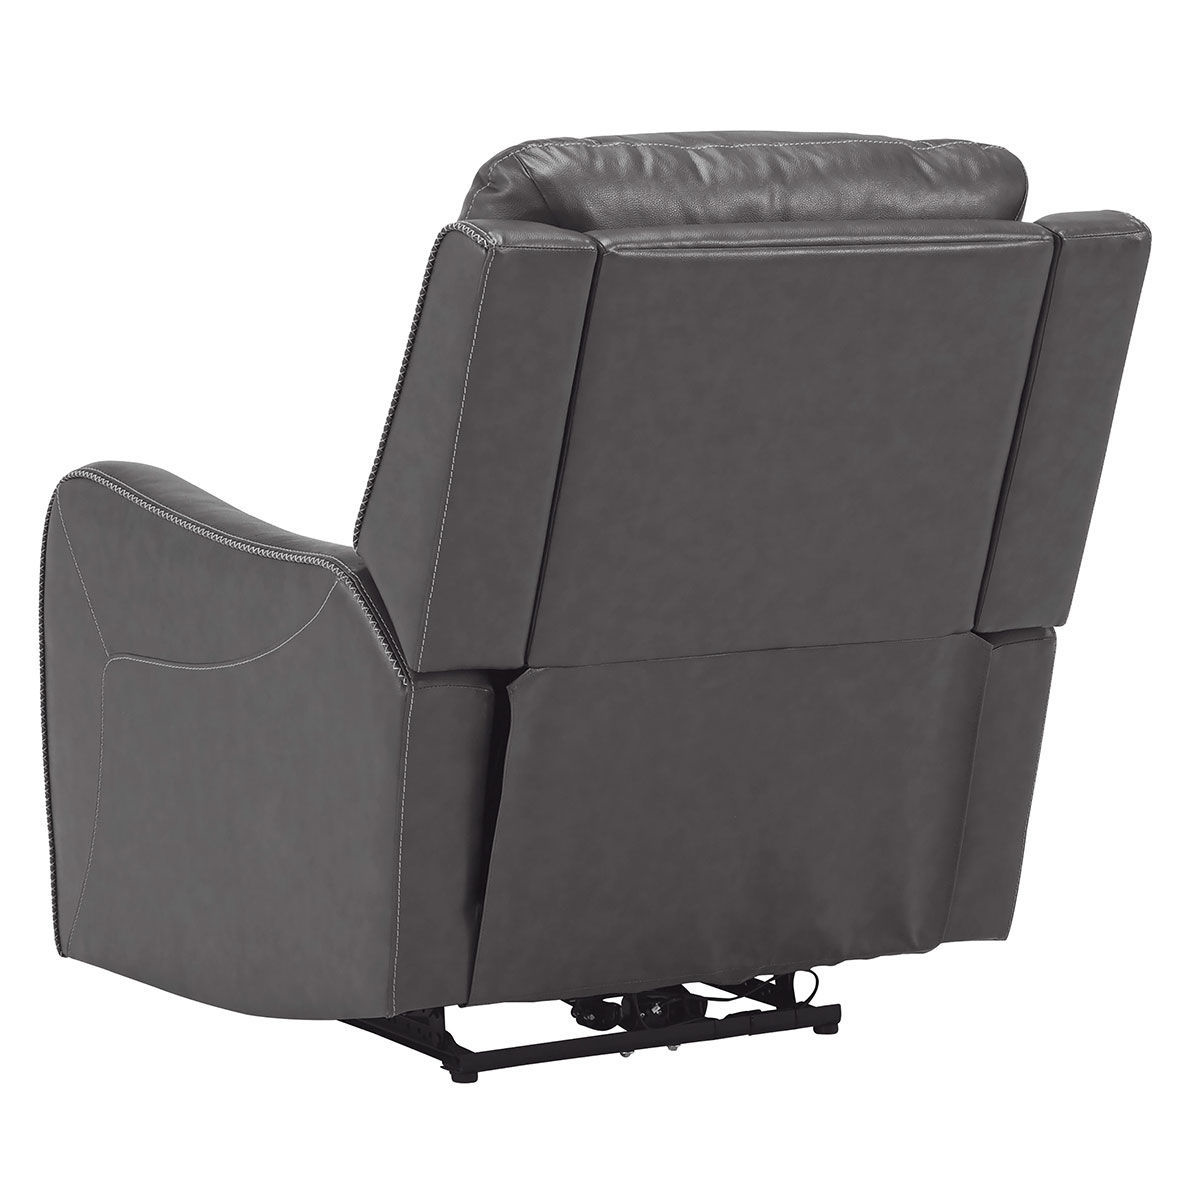 Picture of GRAND GREY WALL RECLINER W/ POWER HEADREST & MASSAGE